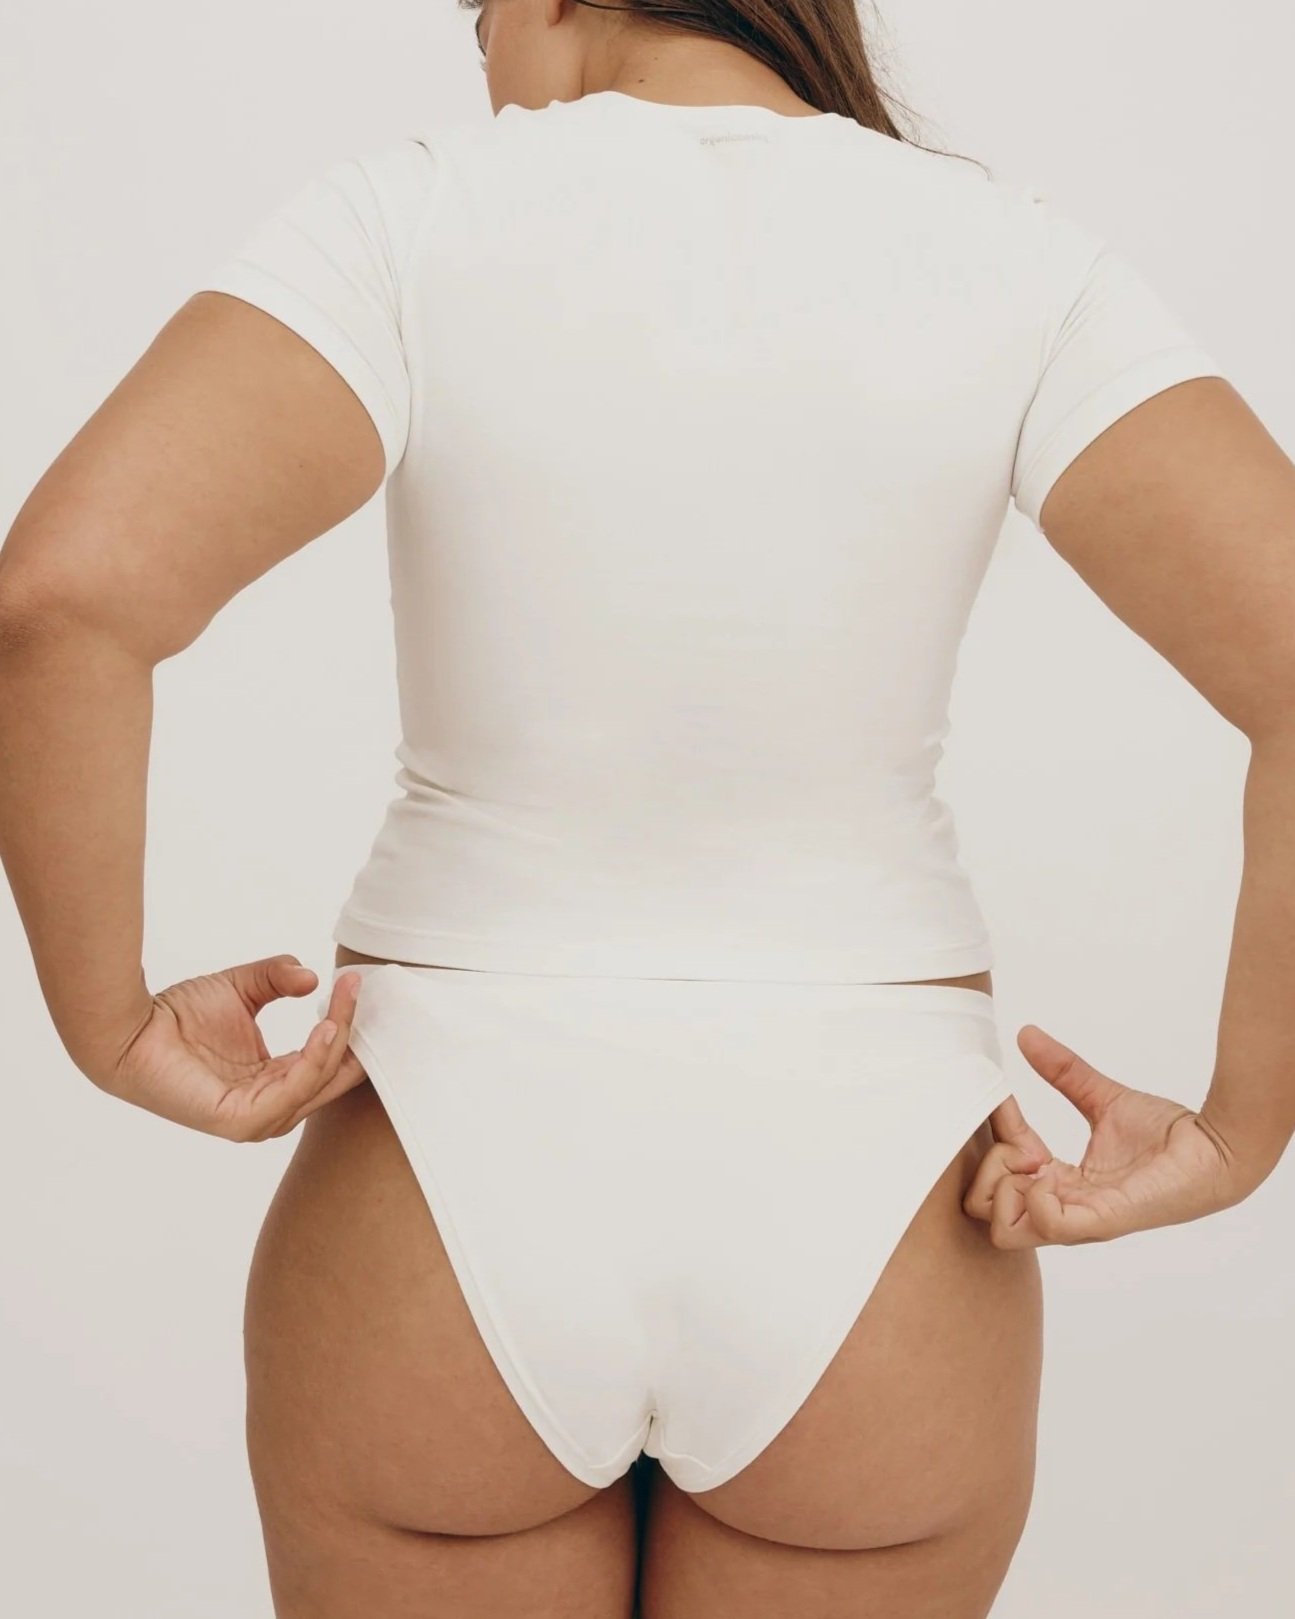 7 Organic Underwear Brands: No Ifs & Butts About Saving The Planet